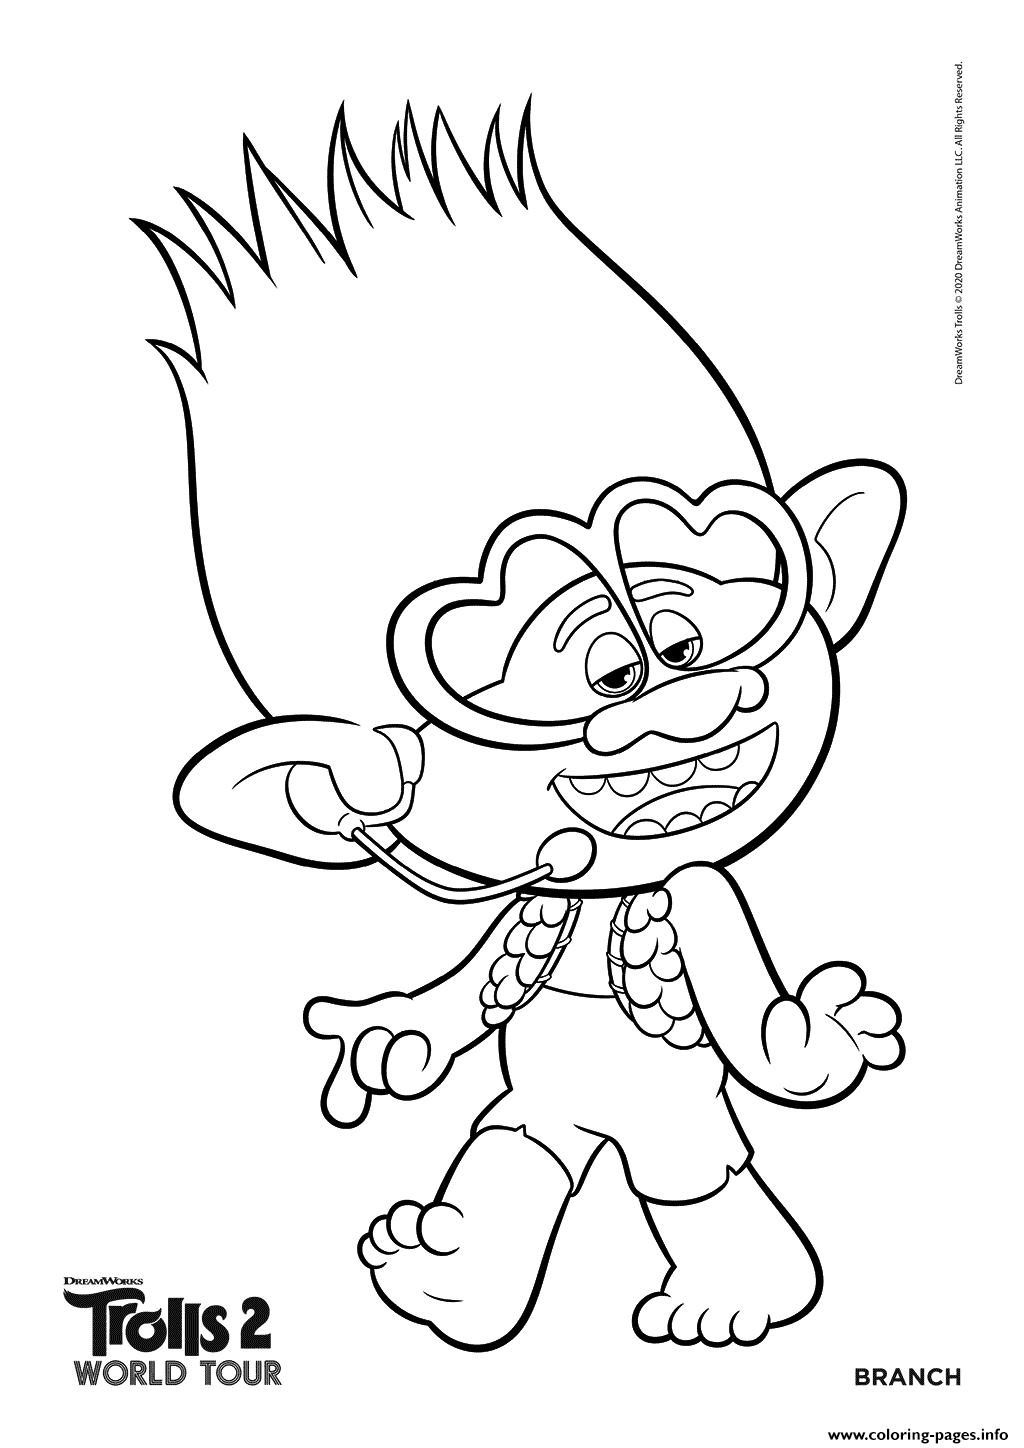 Trolls World Tour Coloring Pages Printable Gif Color Pages Collection ...